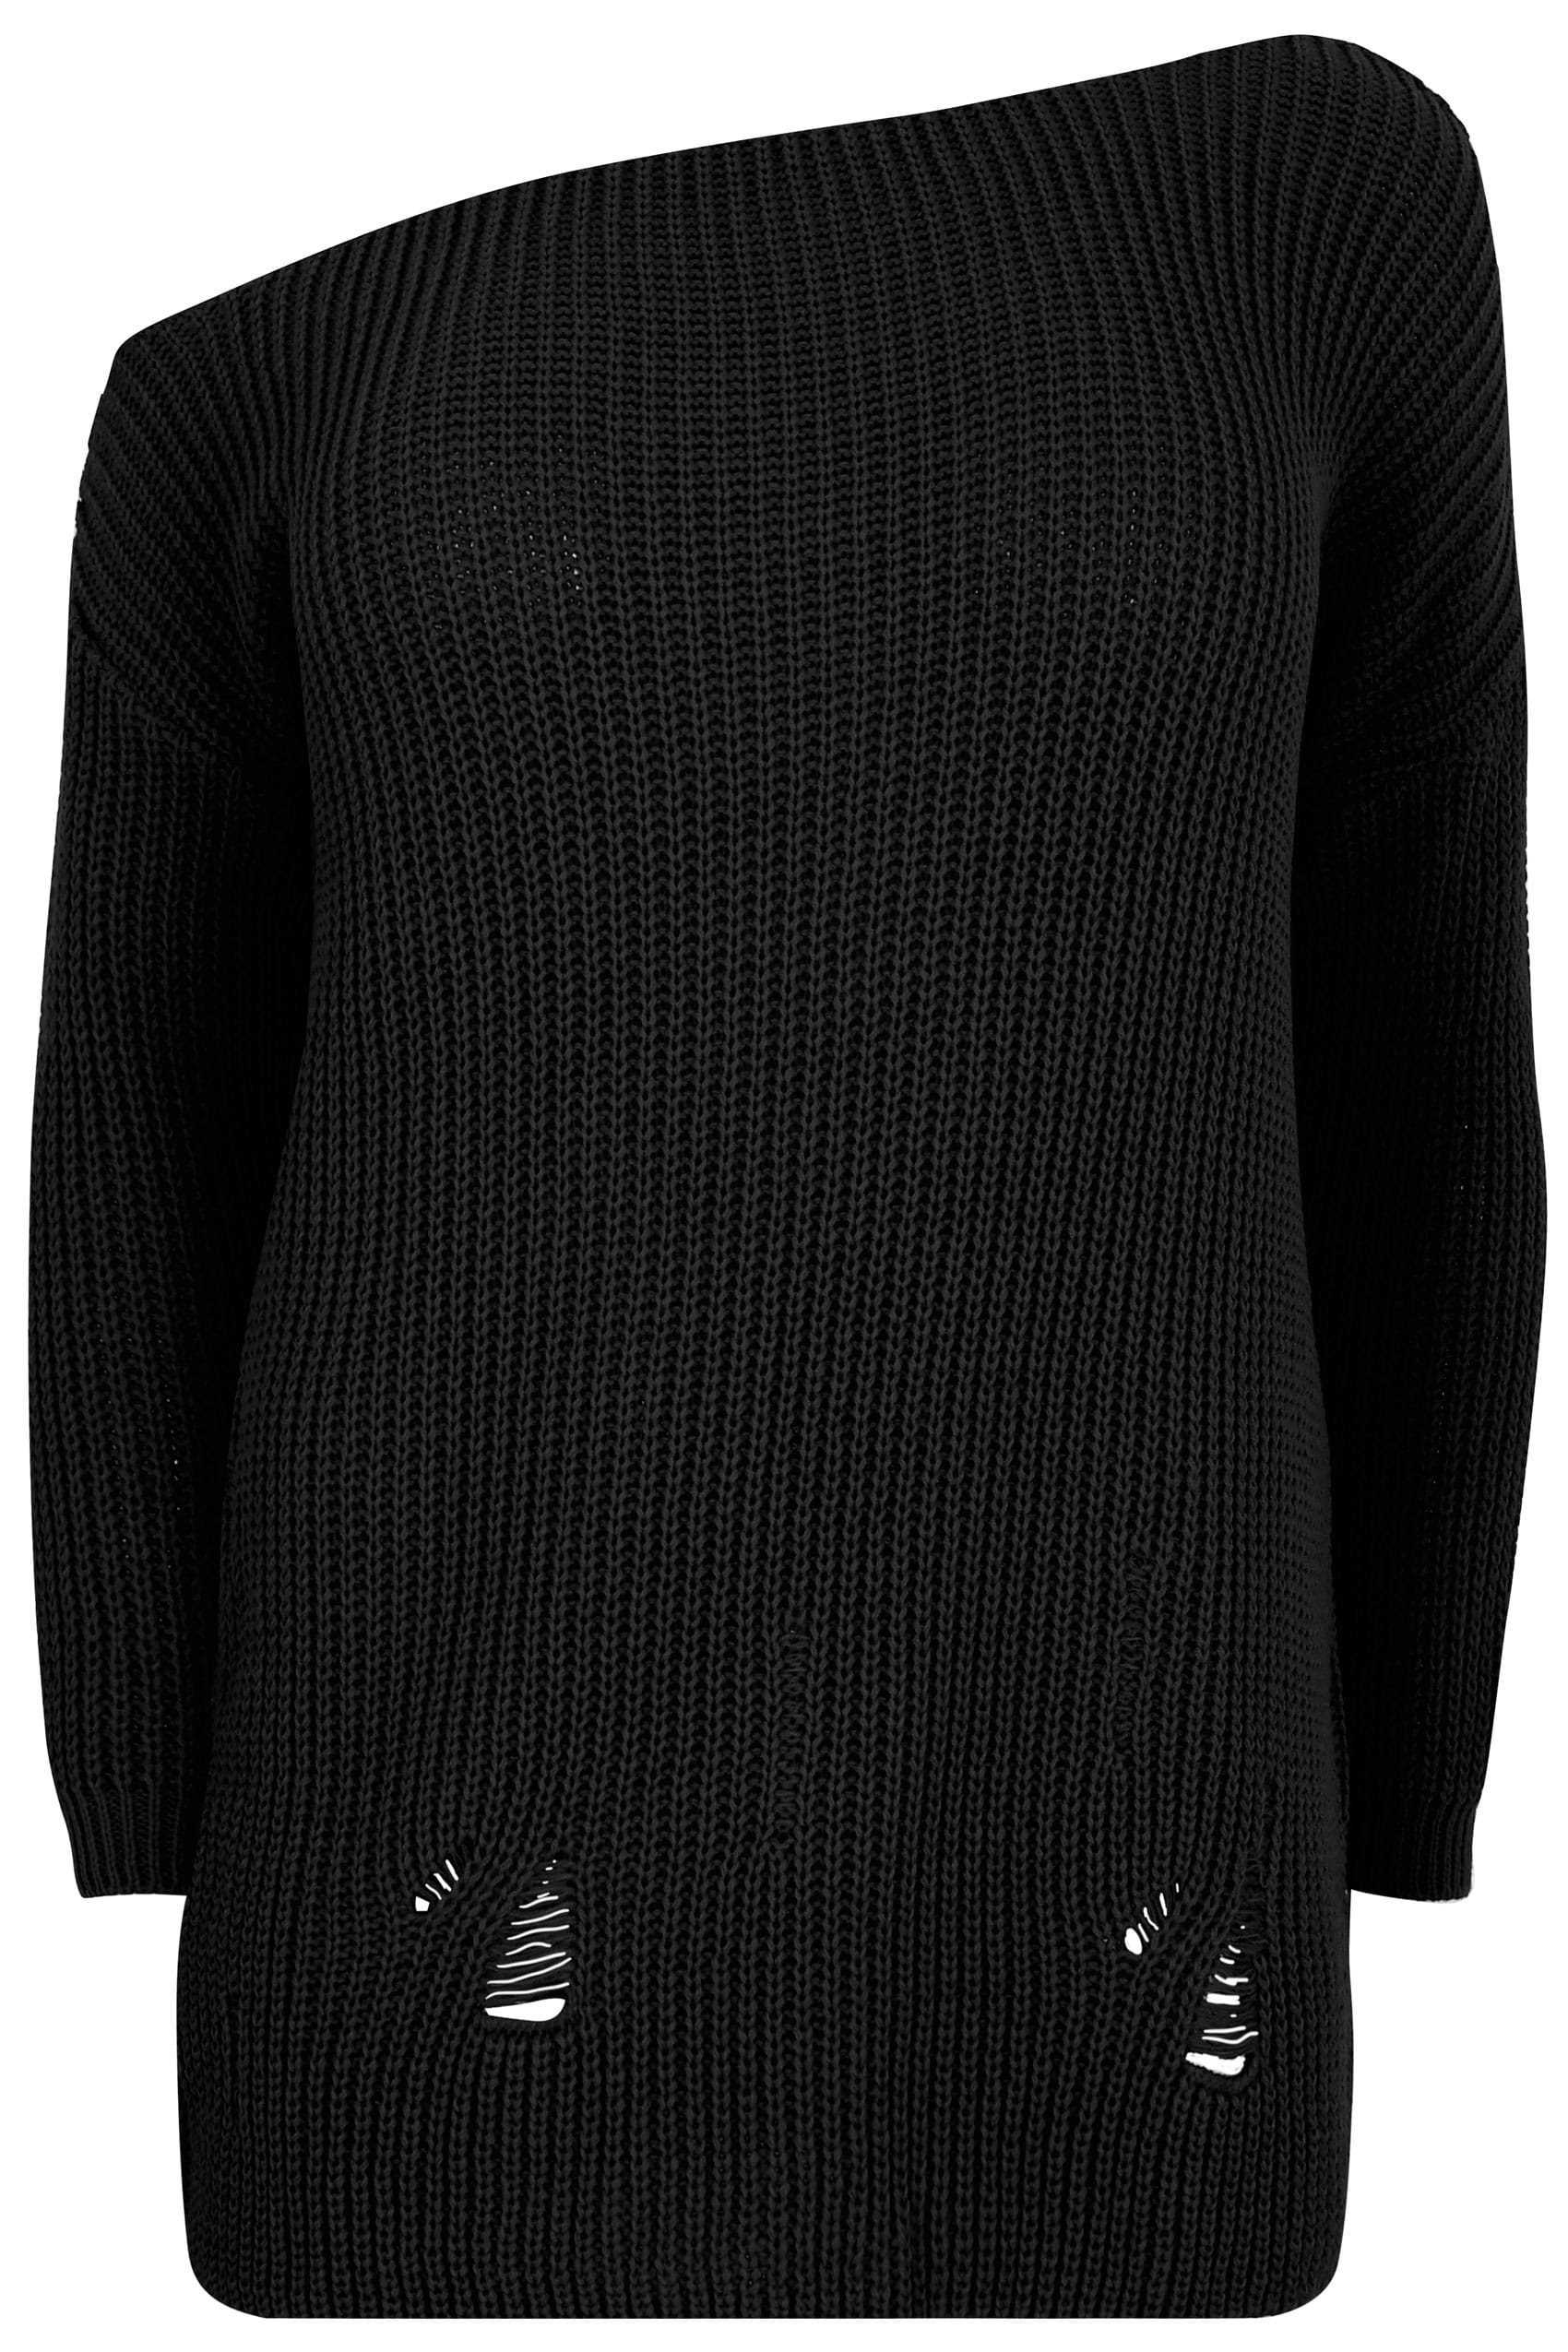 CURVE - - Limited Collection BLACK Zip Back Knitted Jumper 